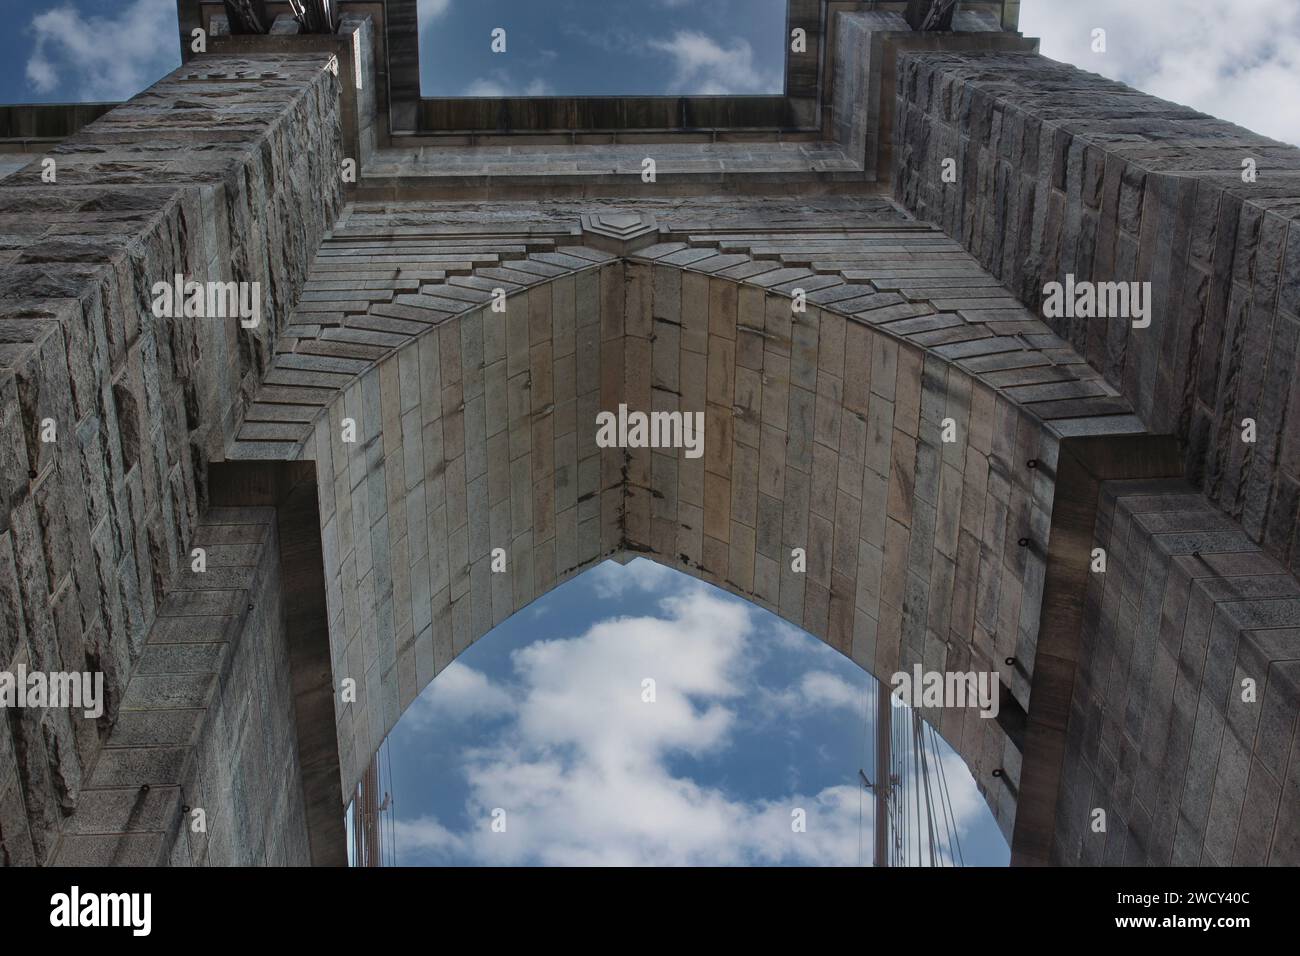 Looking up at a Brooklyn Bridge tower and arch made from limestone and ...